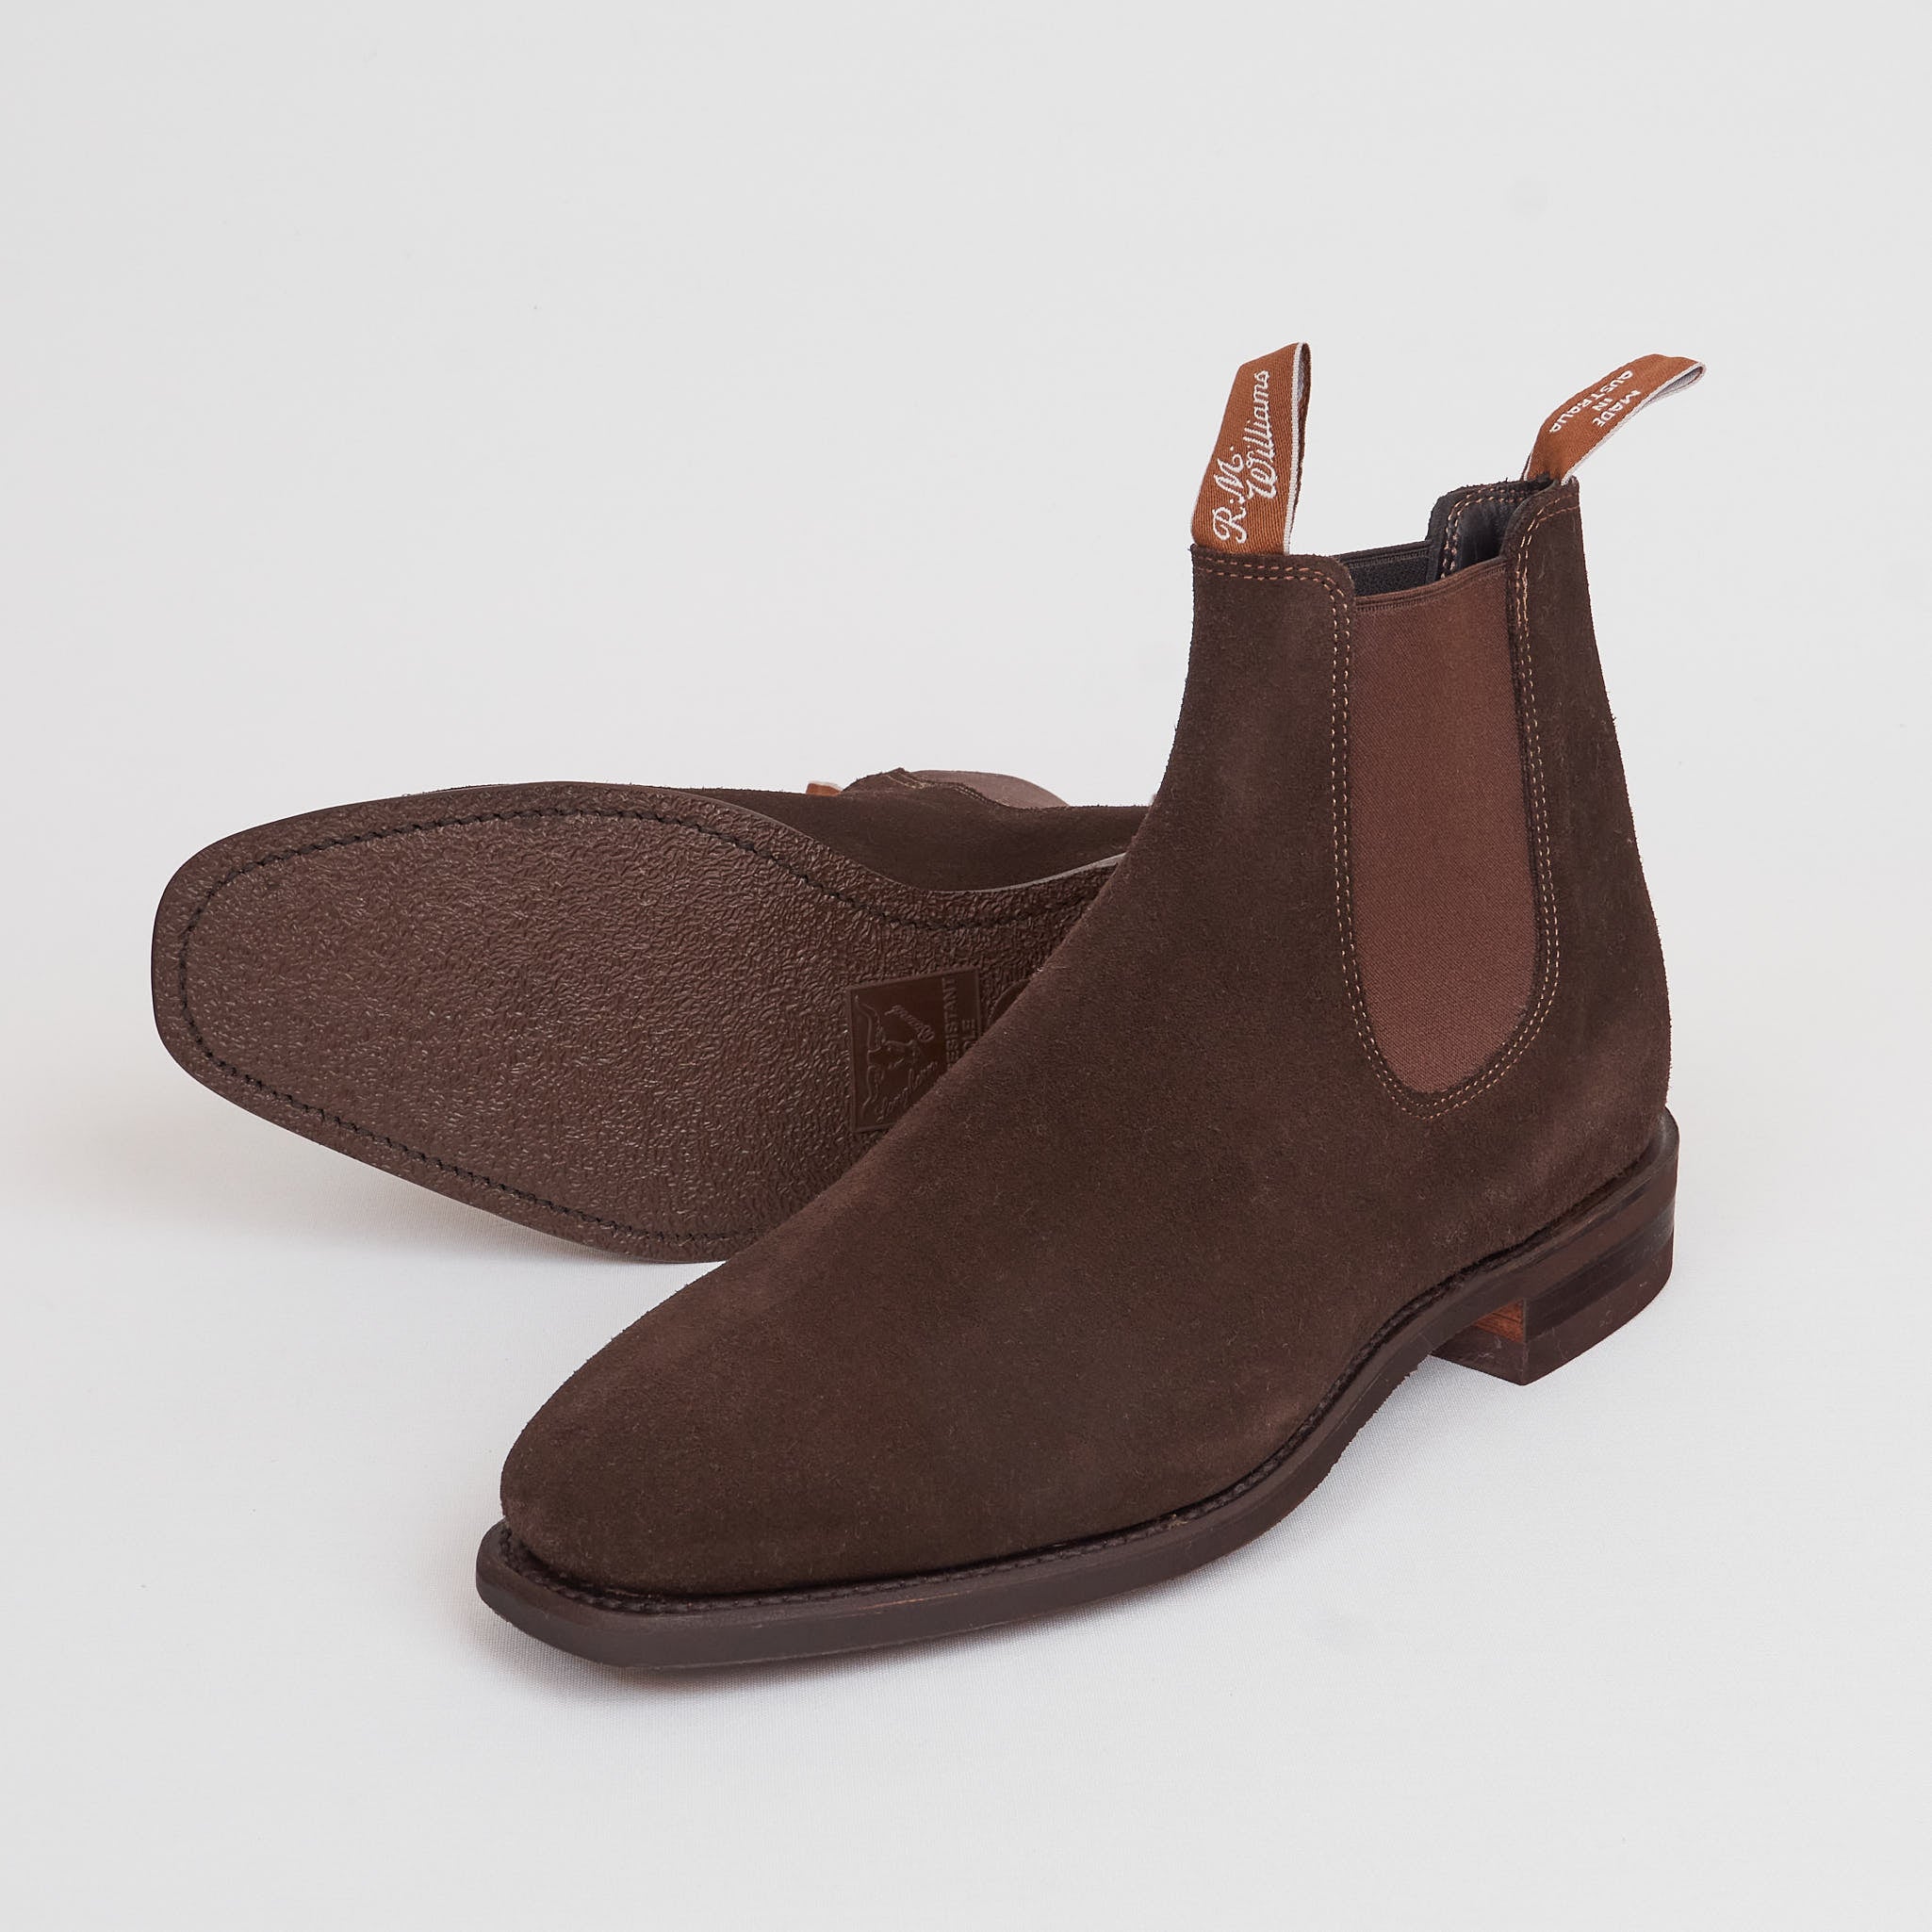 RM Williams Suede Chelsea Boots UK Size 7 